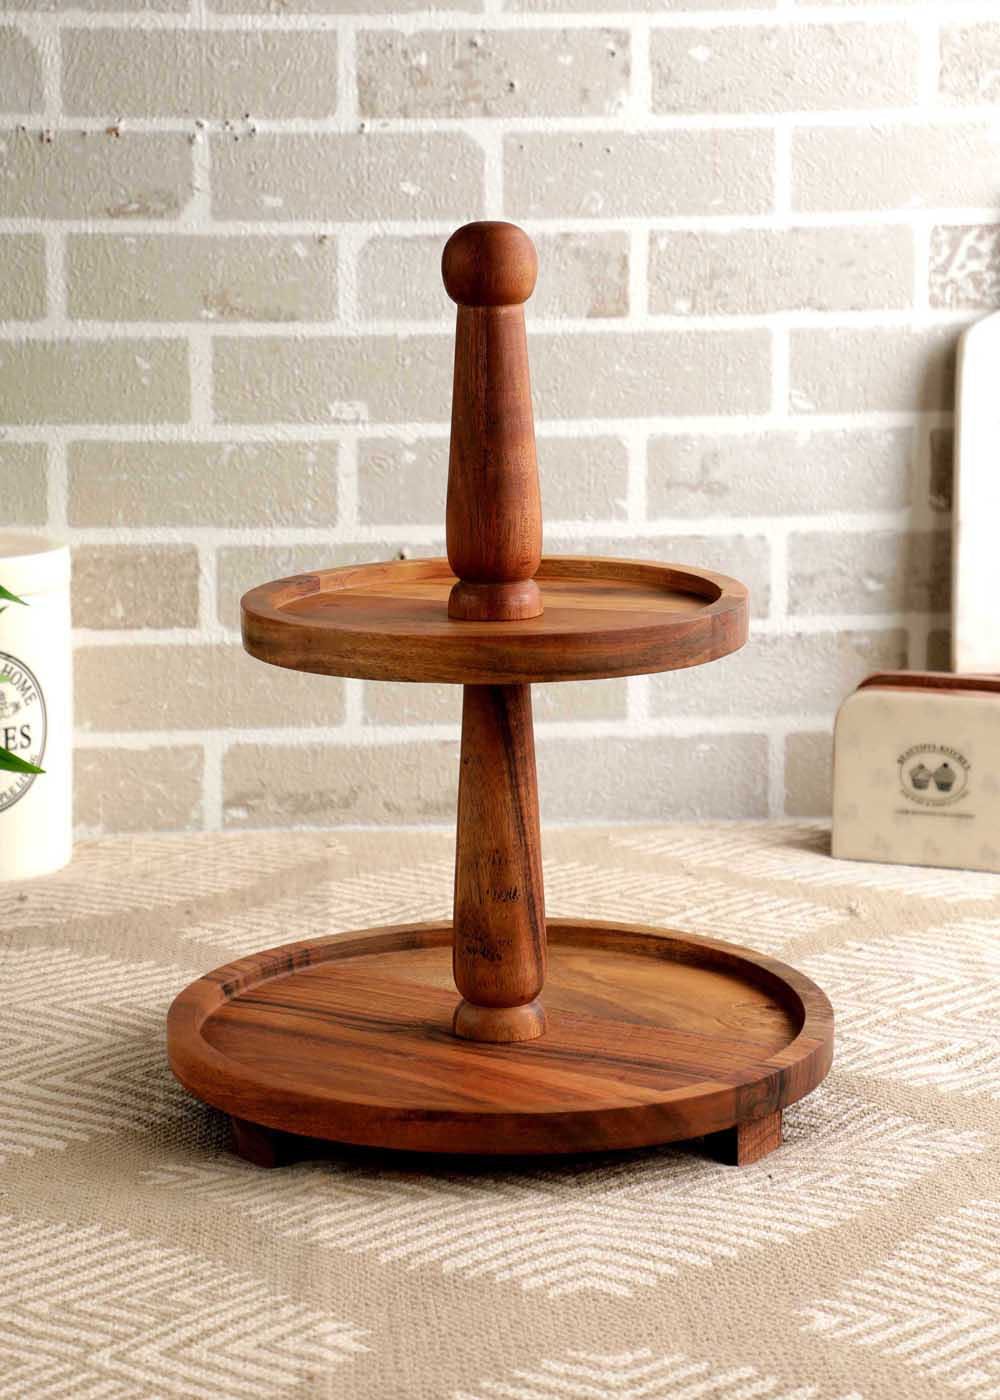 Get Hanna 2 Tier Cake Stand at ₹ 2395 | LBB Shop